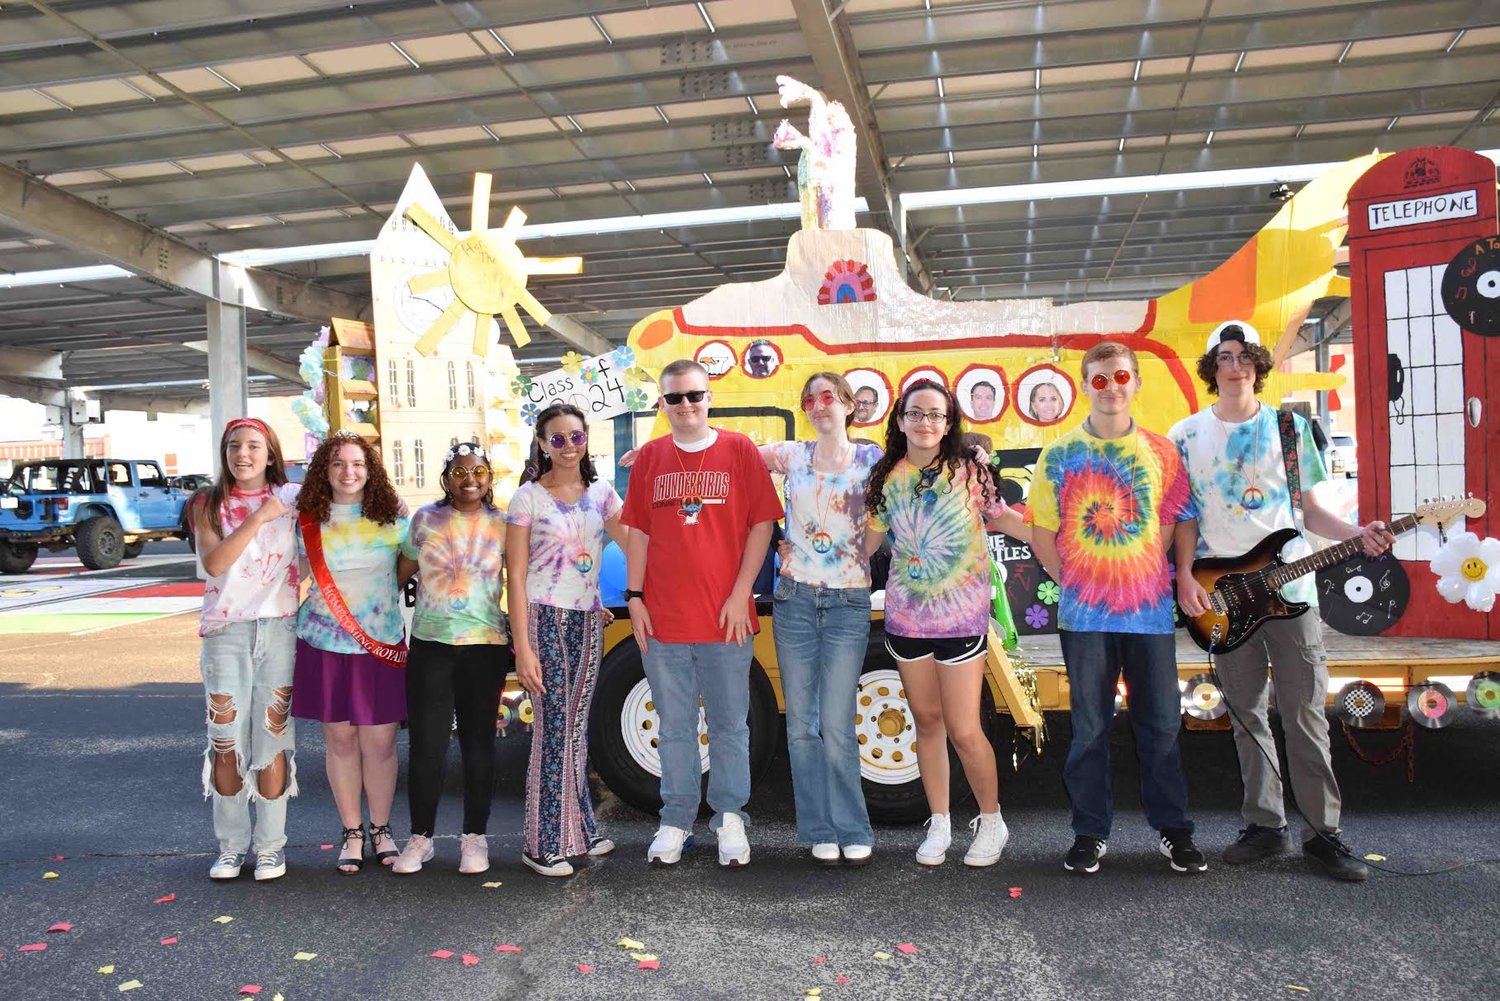 The Junior Class of 2024’s Beatles-themed float took home the trophy for best homecoming float and skit.